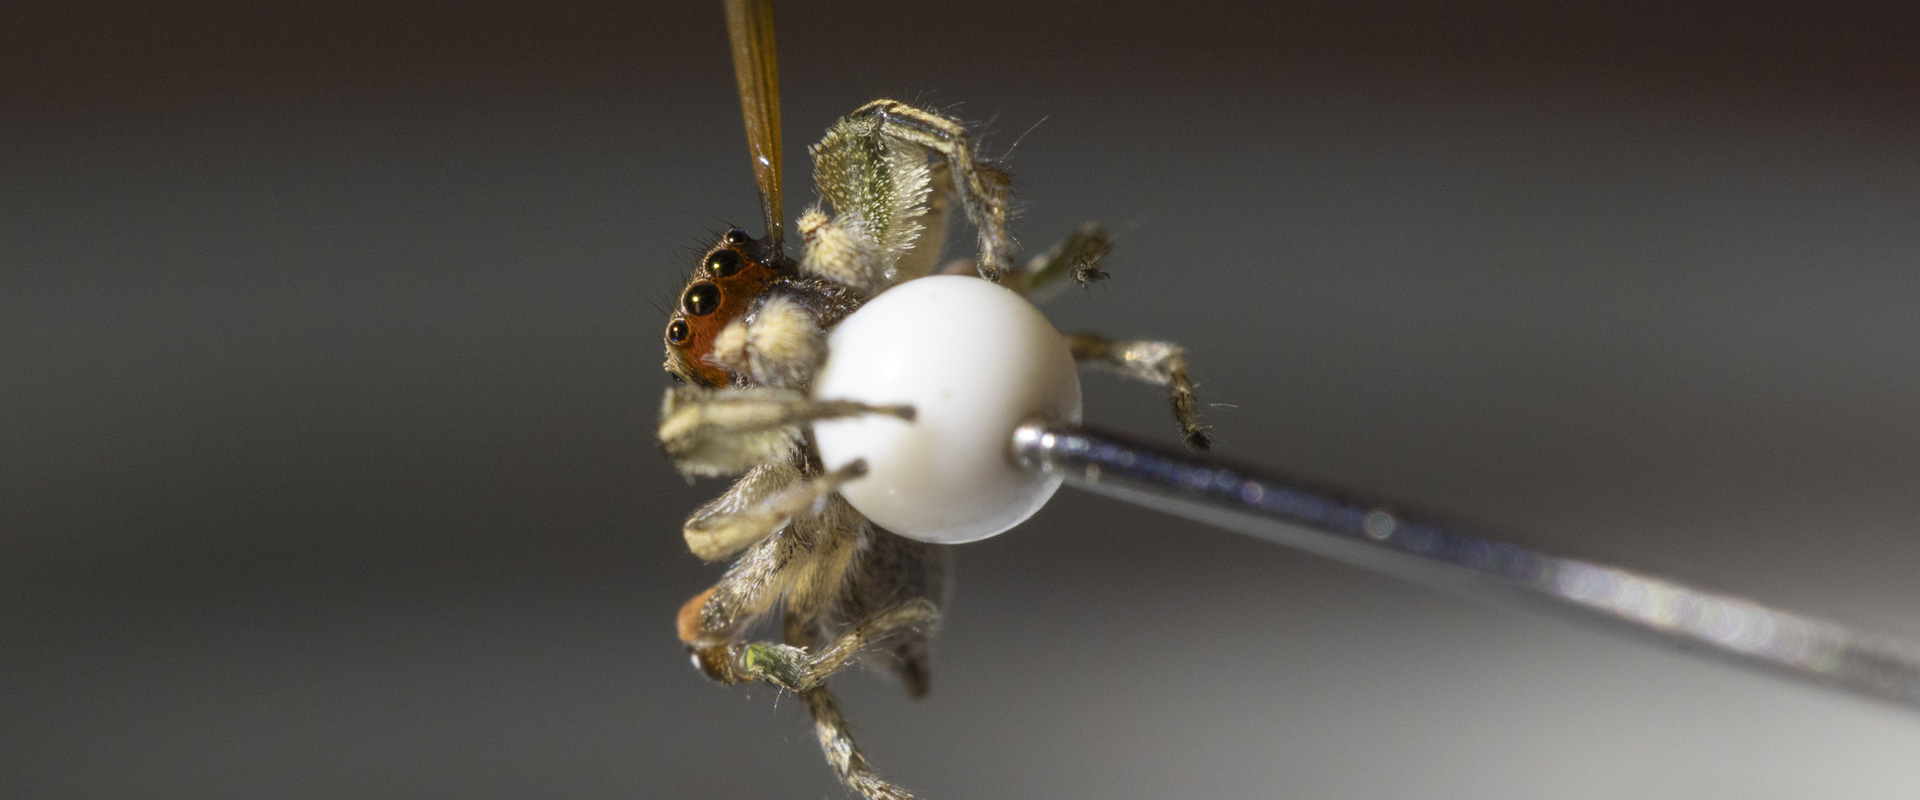 Ultra close-up image of a jumping spider being painted with eyeliner for a study.